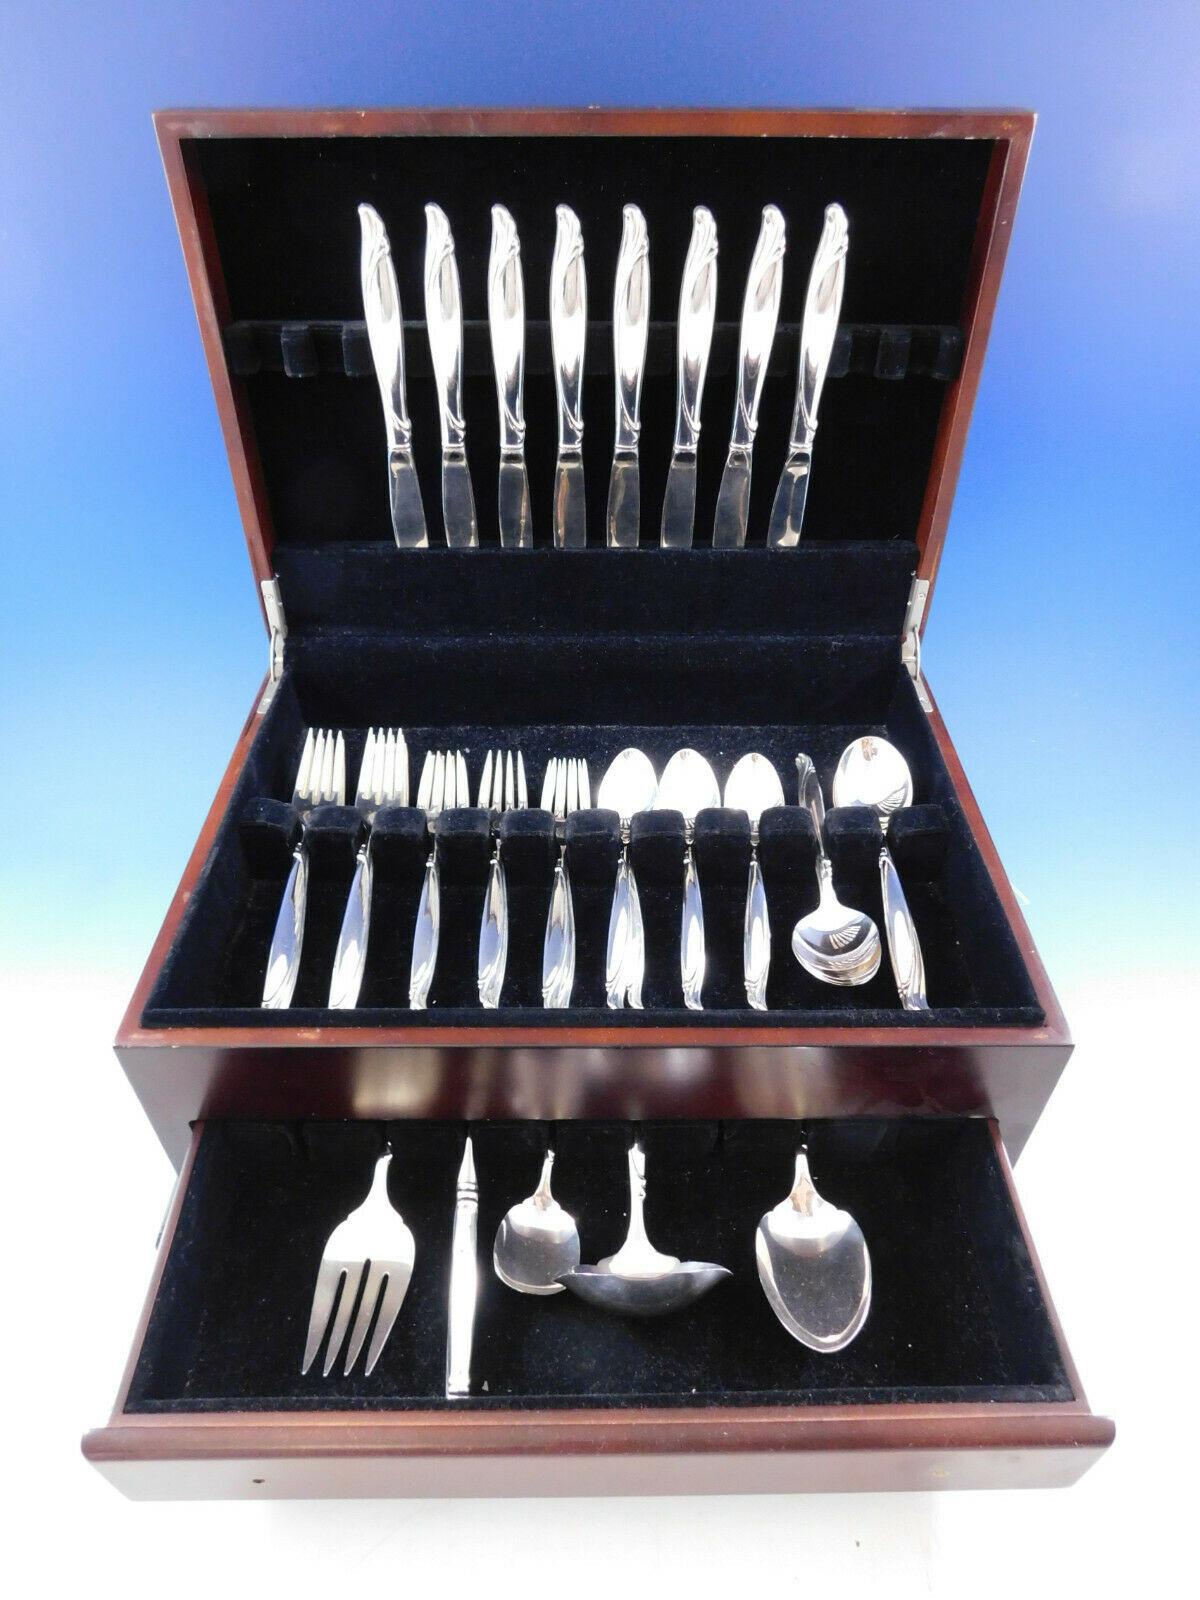 Sentimental by Oneida sterling silver flatware set, 45 Pieces. The flowing quality of the silver is expressed in this Mid-Century Modern design. This set includes:

8 knives, 9